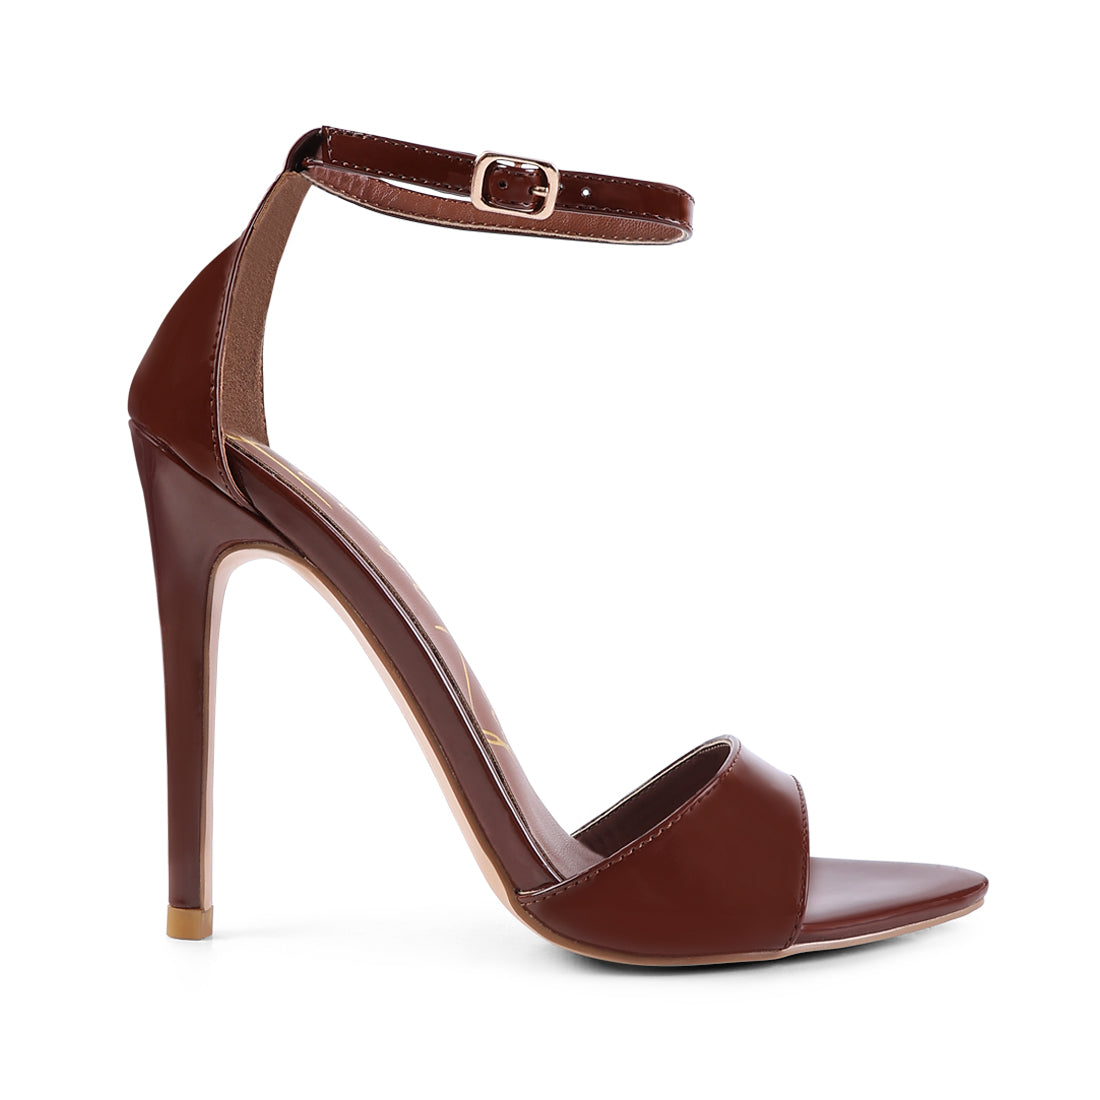 Brown Ankle Strap High Heeled Sandals